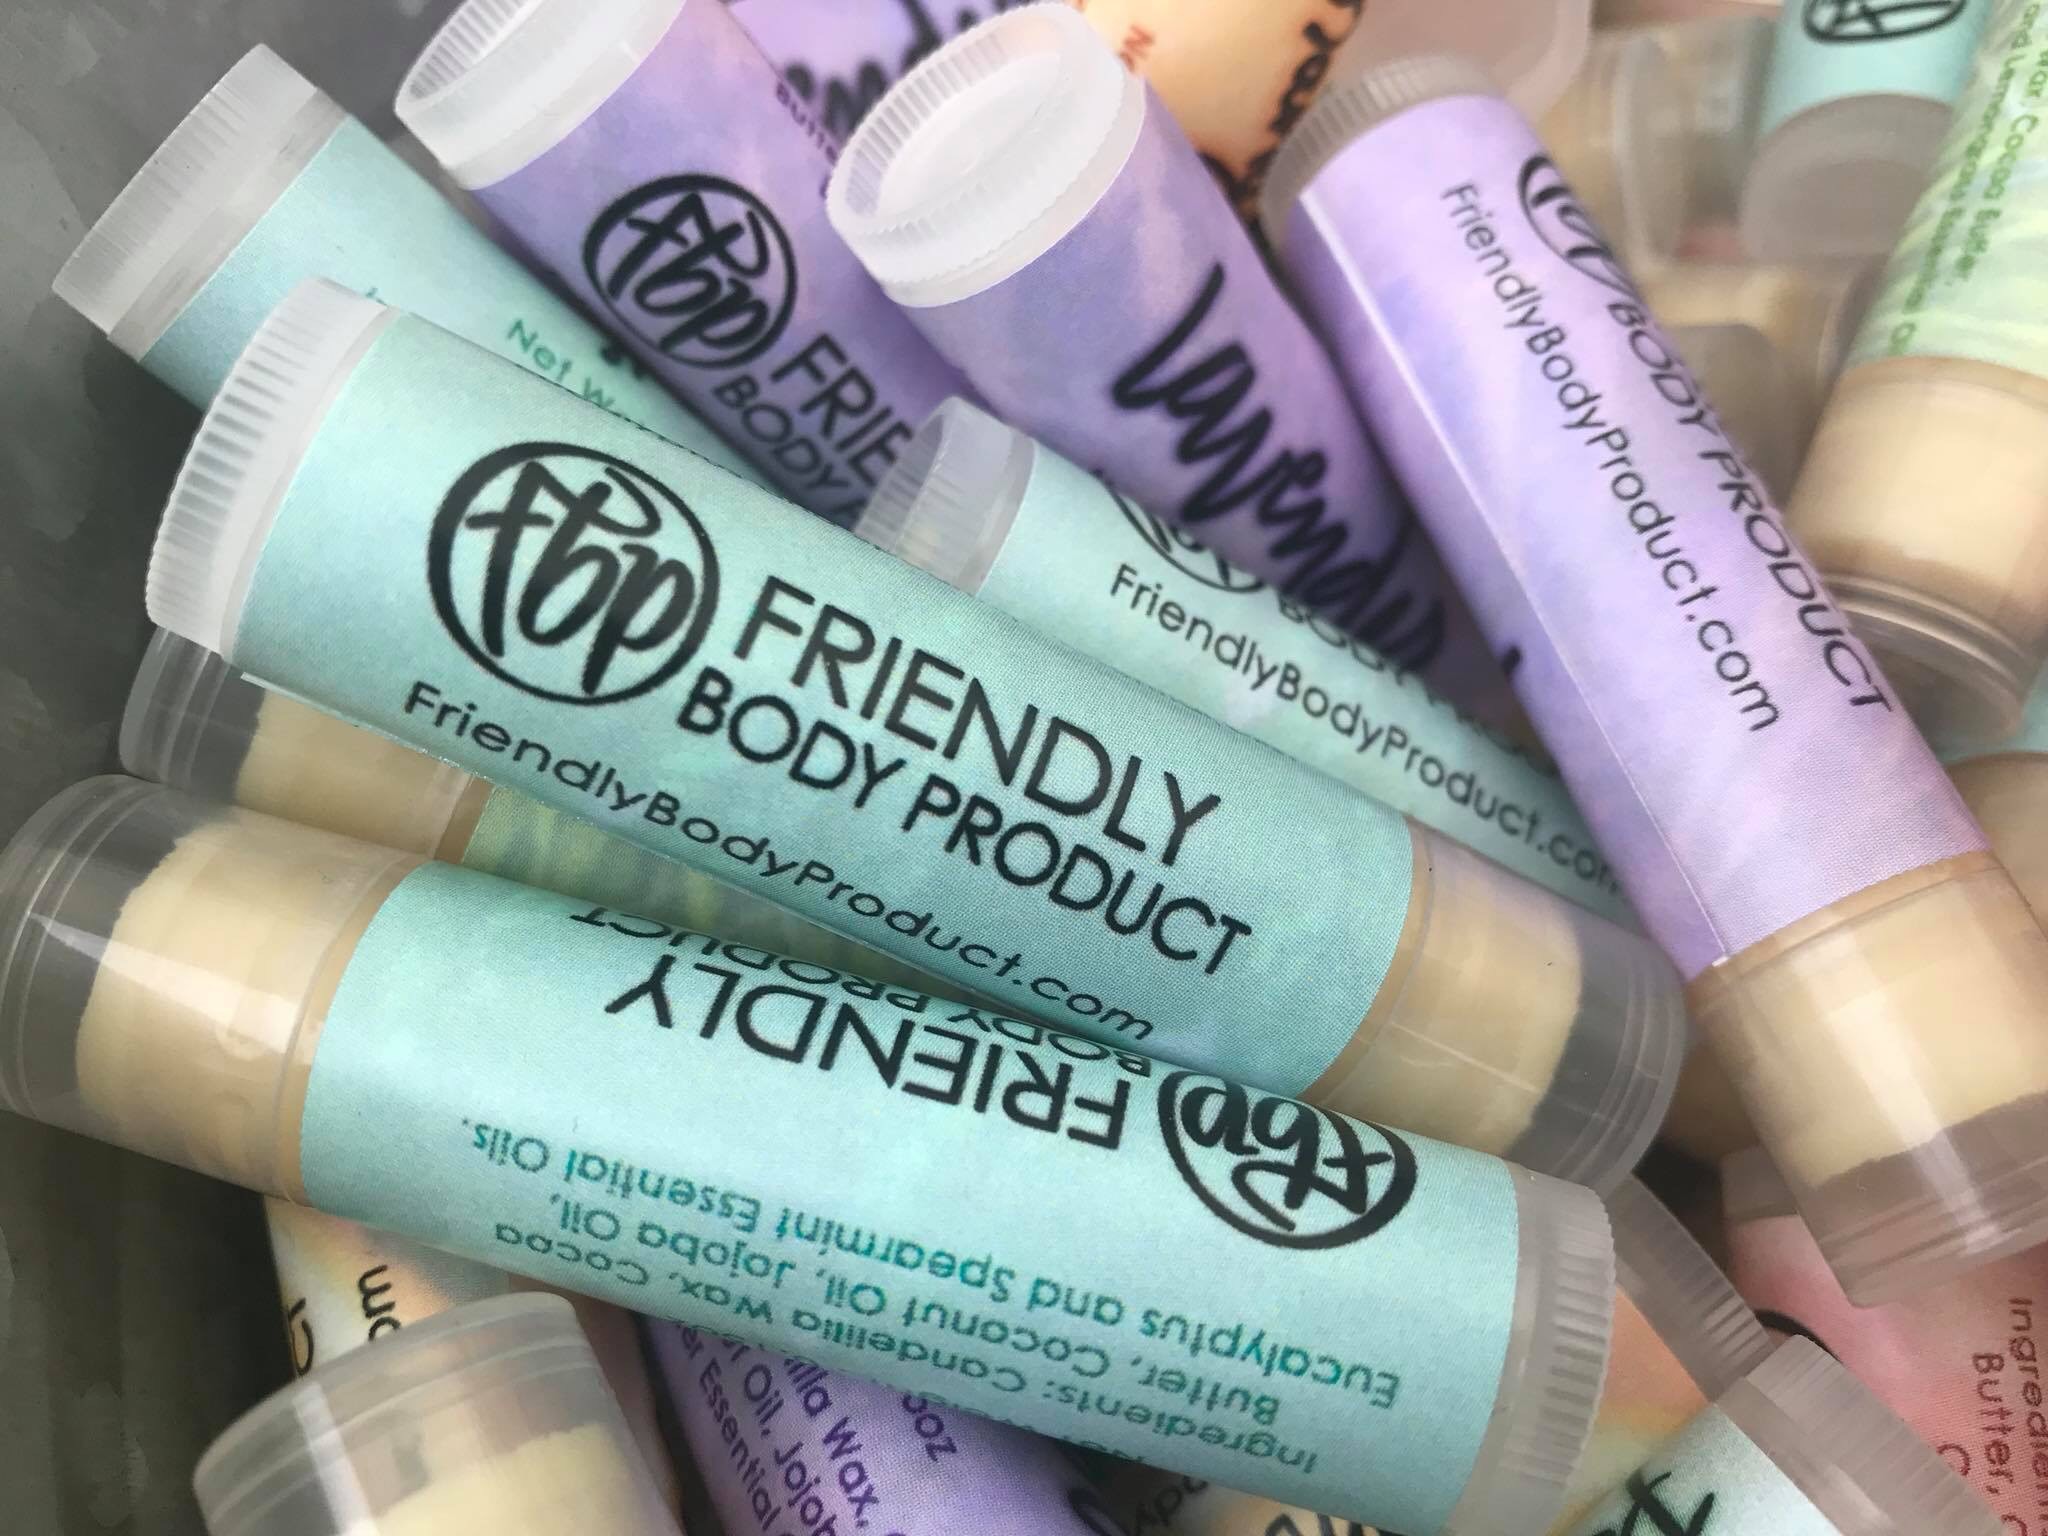 lip balms made by friendly body product